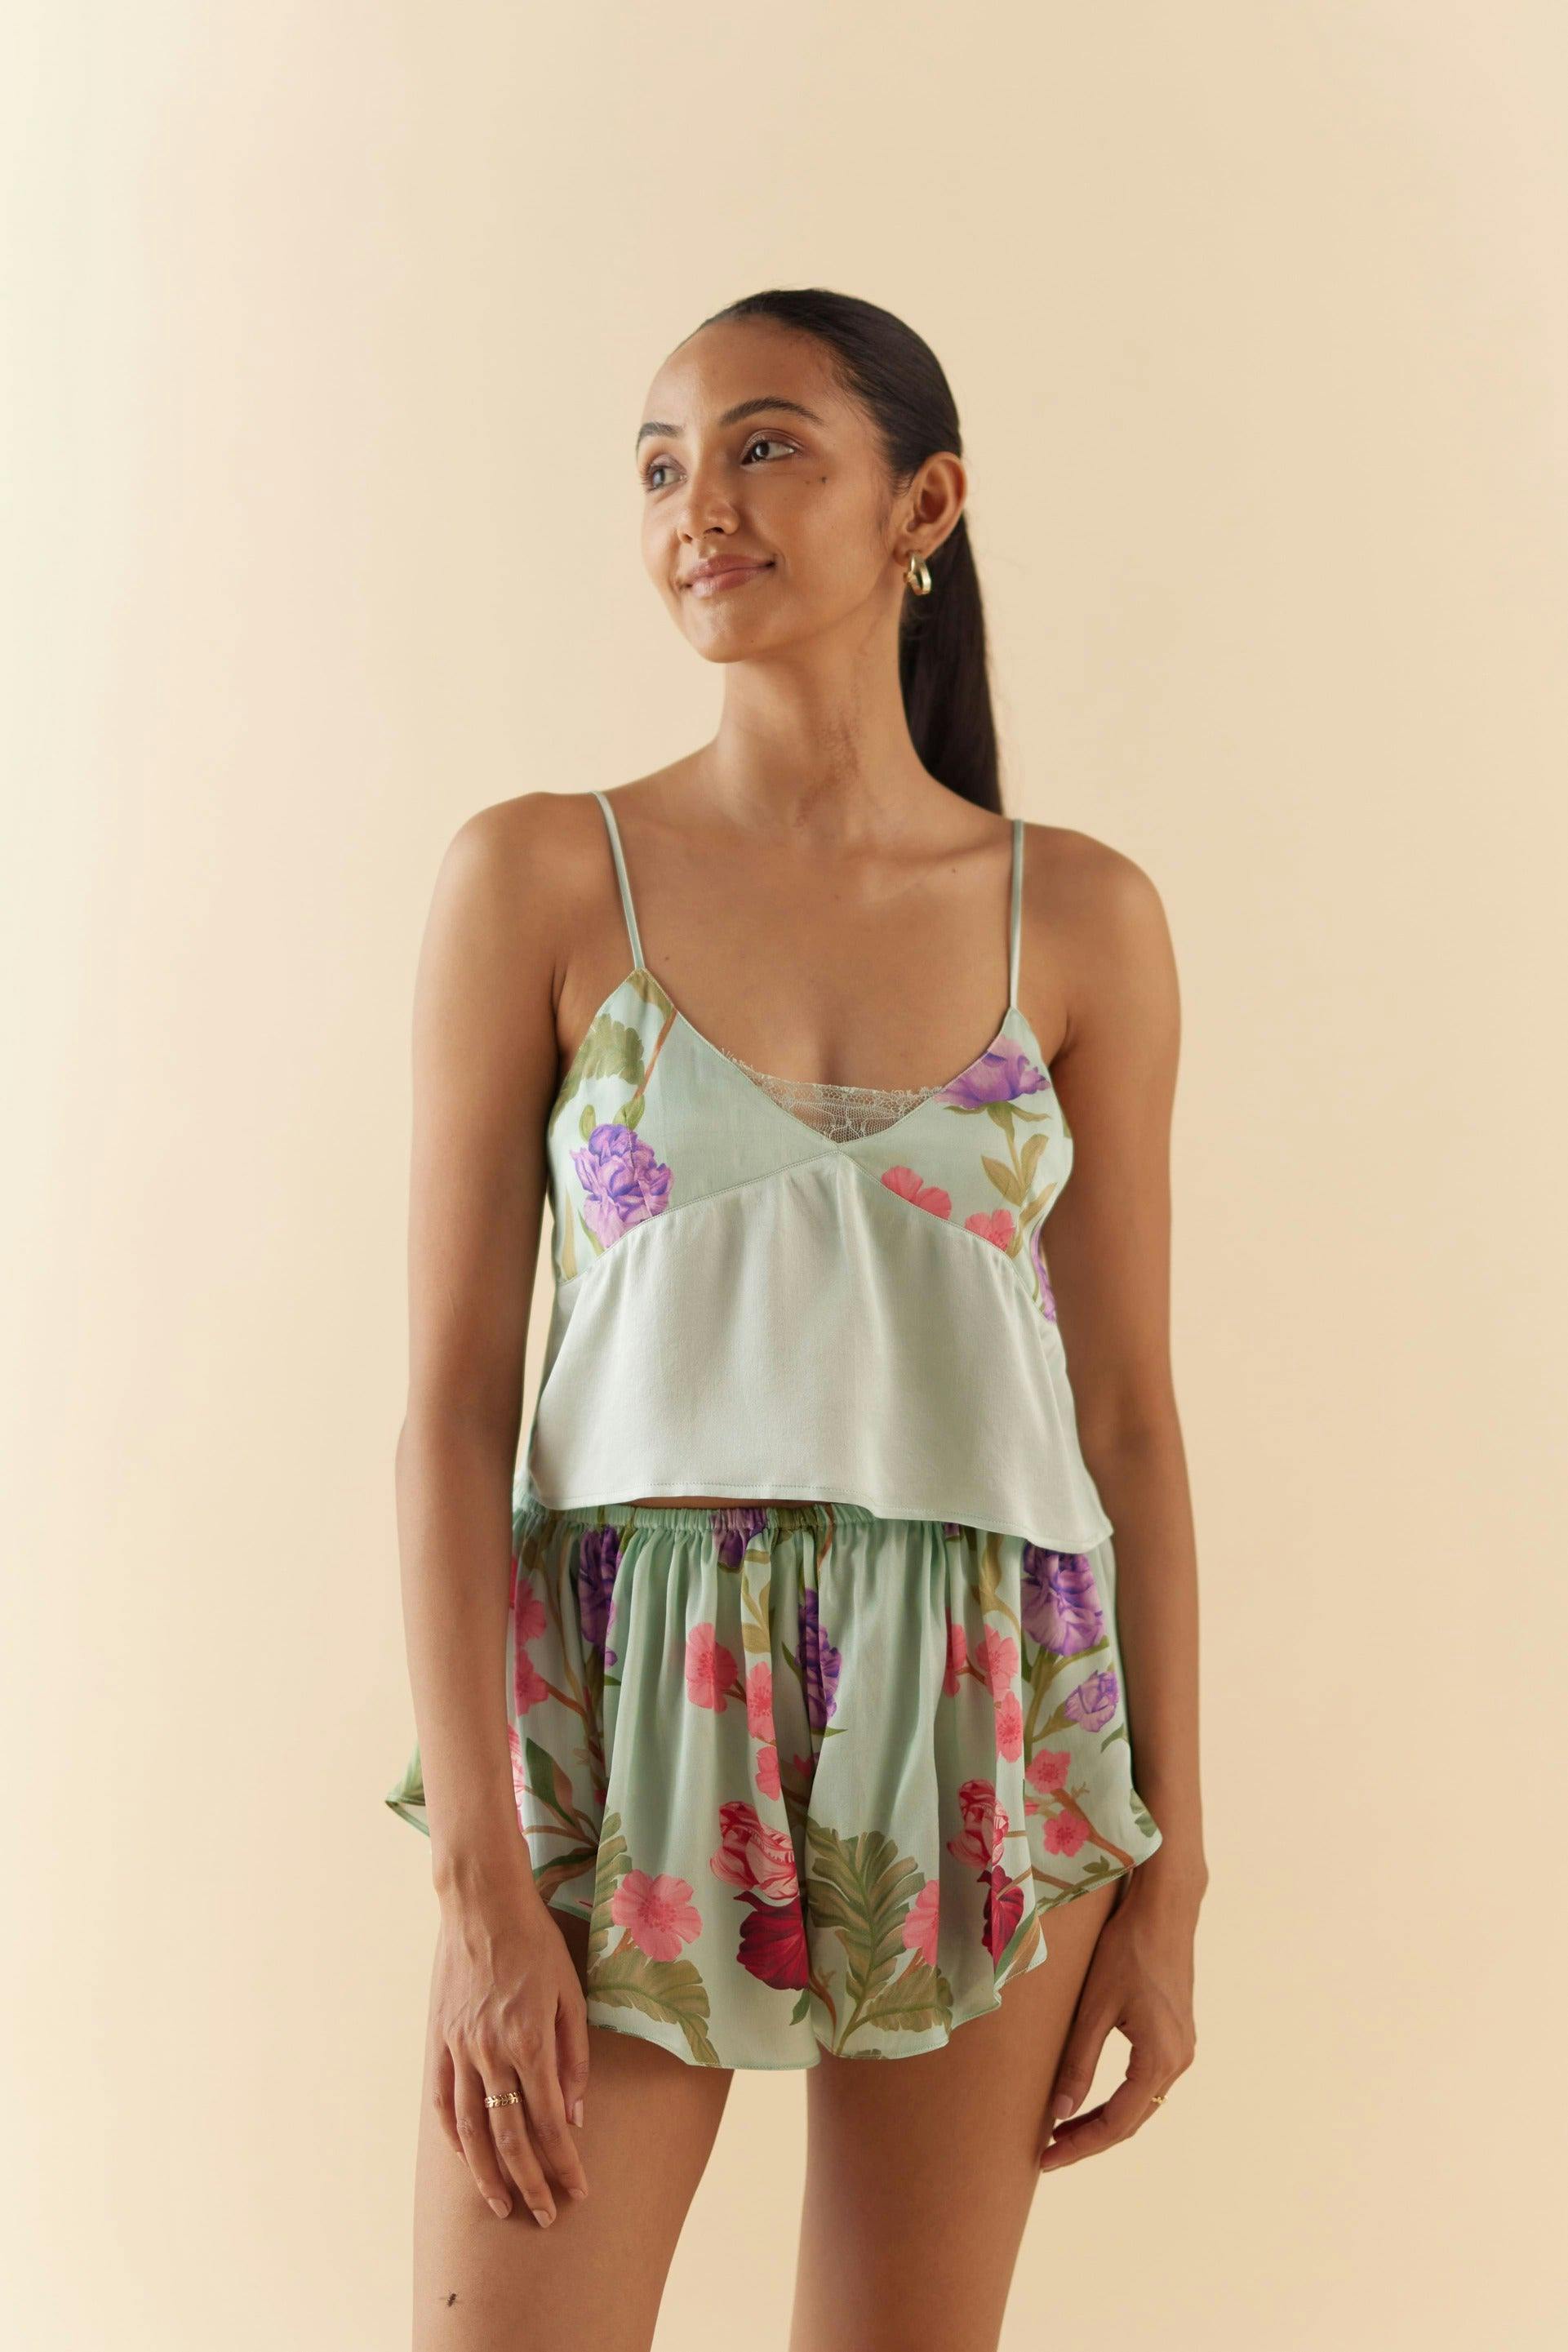 Thumbnail preview #2 for Celeste Floral Dream Intimate Camisole Set